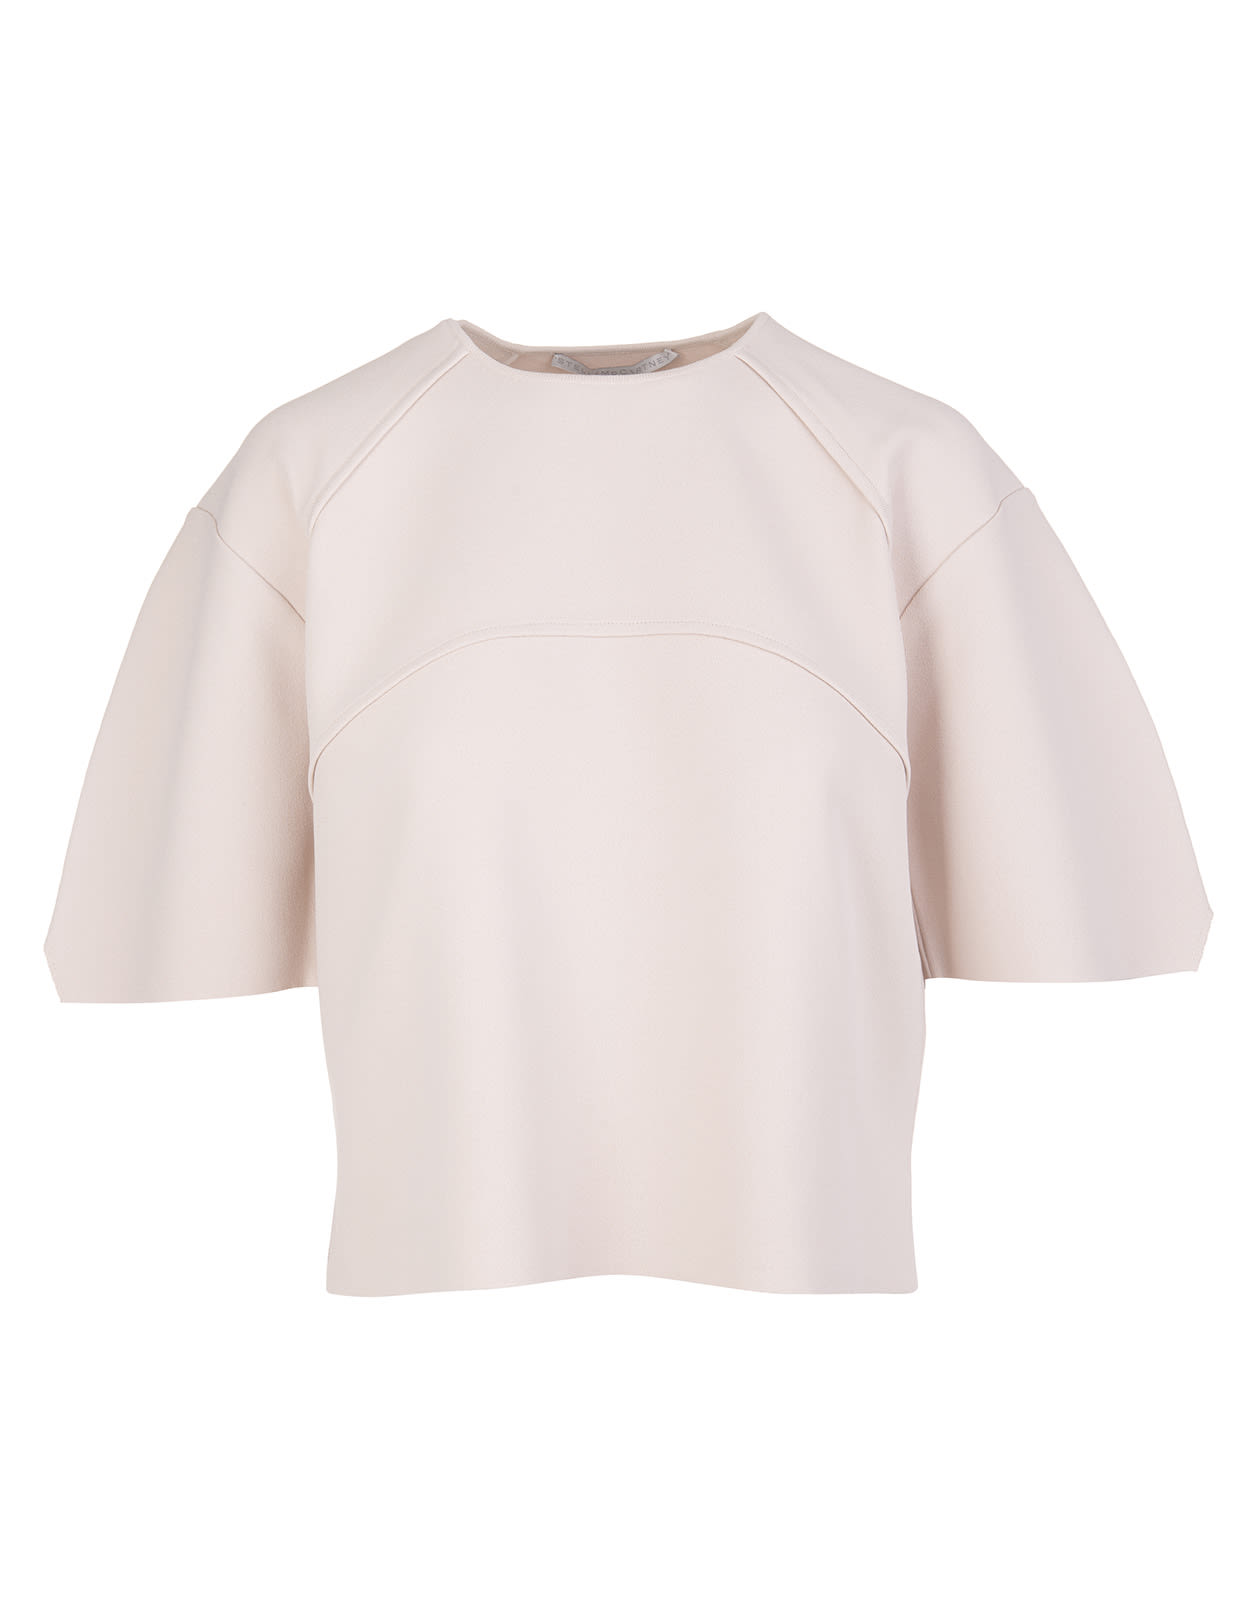 Stella McCartney Pale Pink Structured Cropped Top